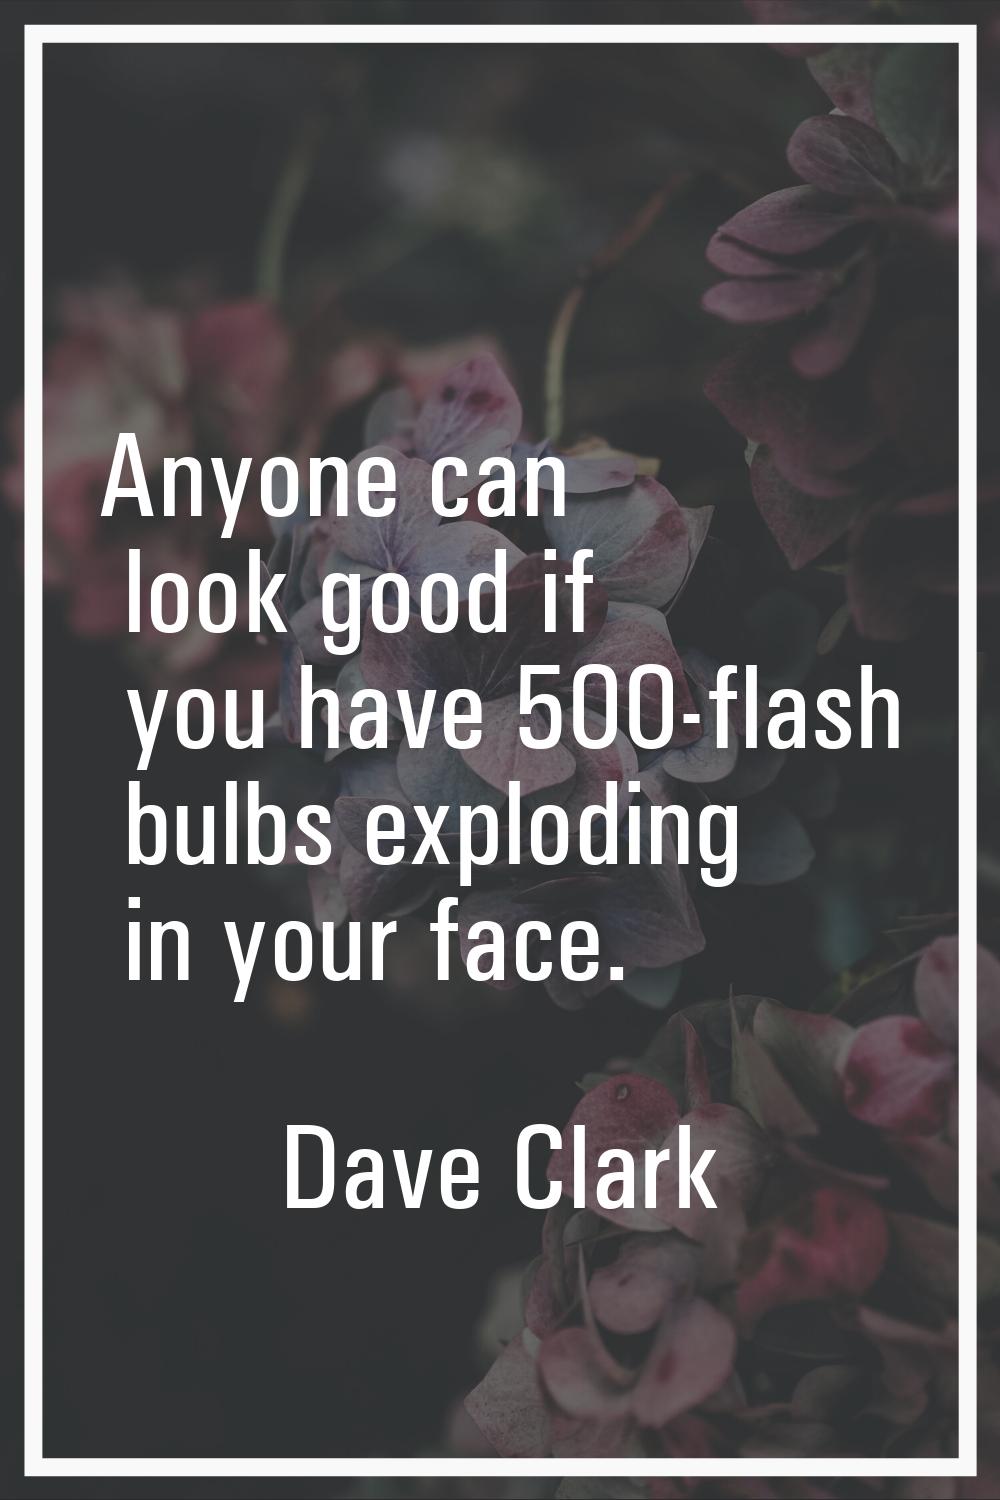 Anyone can look good if you have 500-flash bulbs exploding in your face.